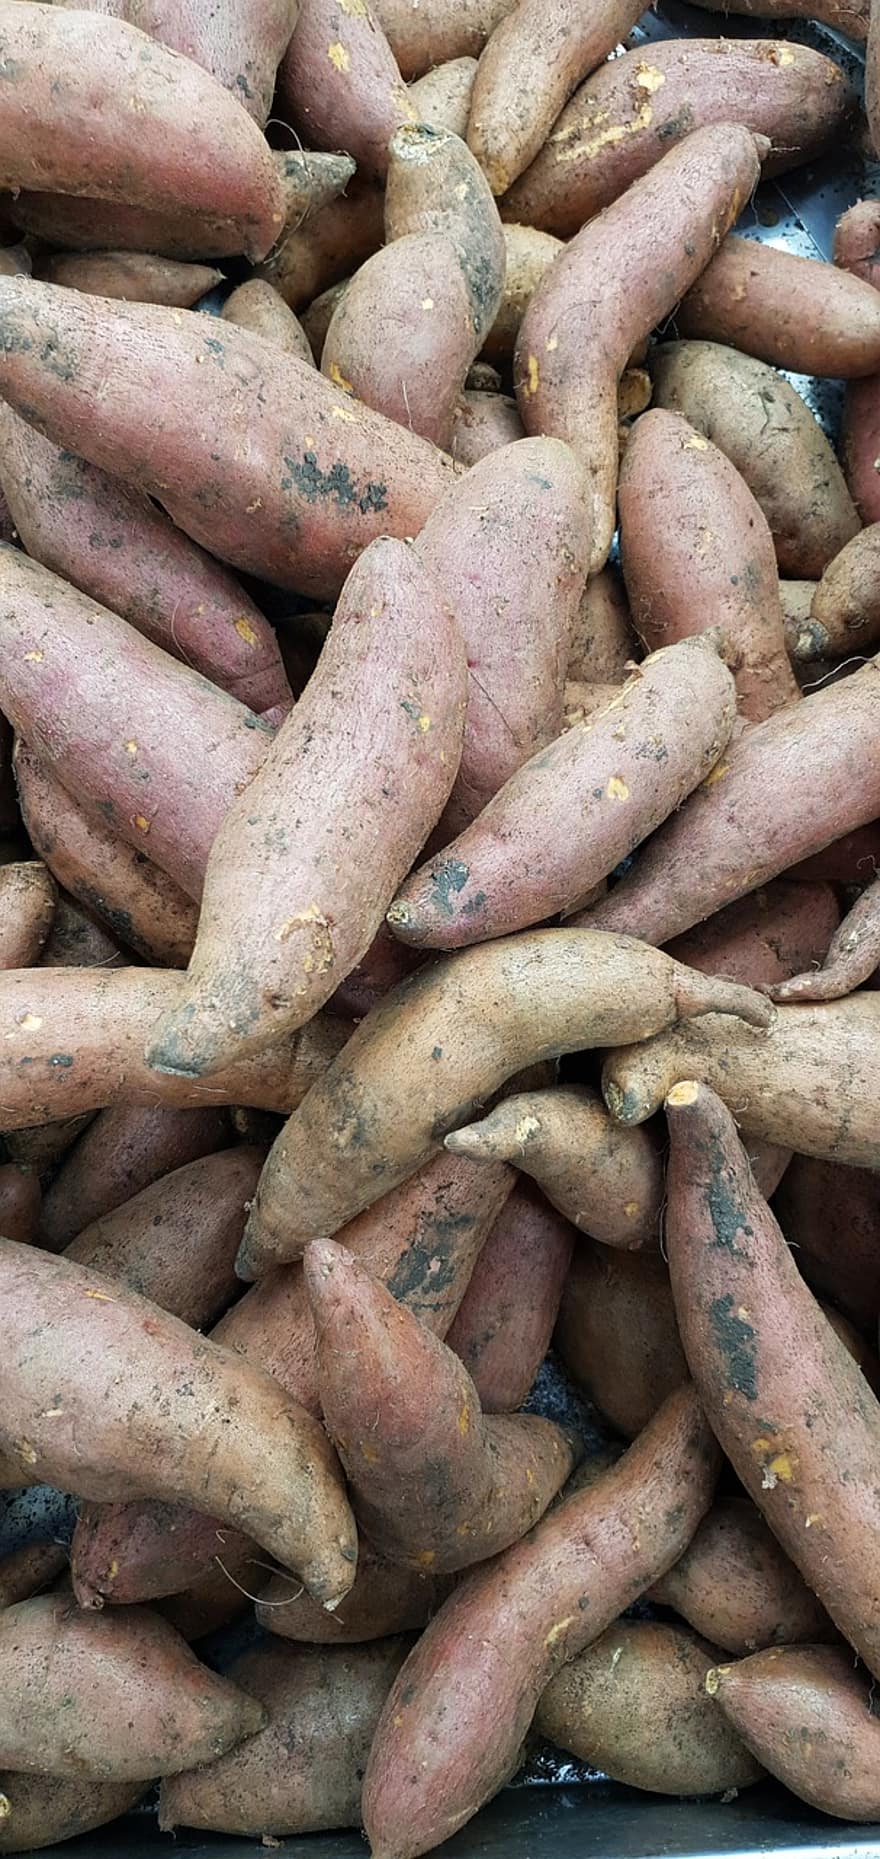 Sweet Potatoes, Harvest, raw potato, freshness, vegetable, agriculture, food, healthy eating, organic, root vegetable, close-up